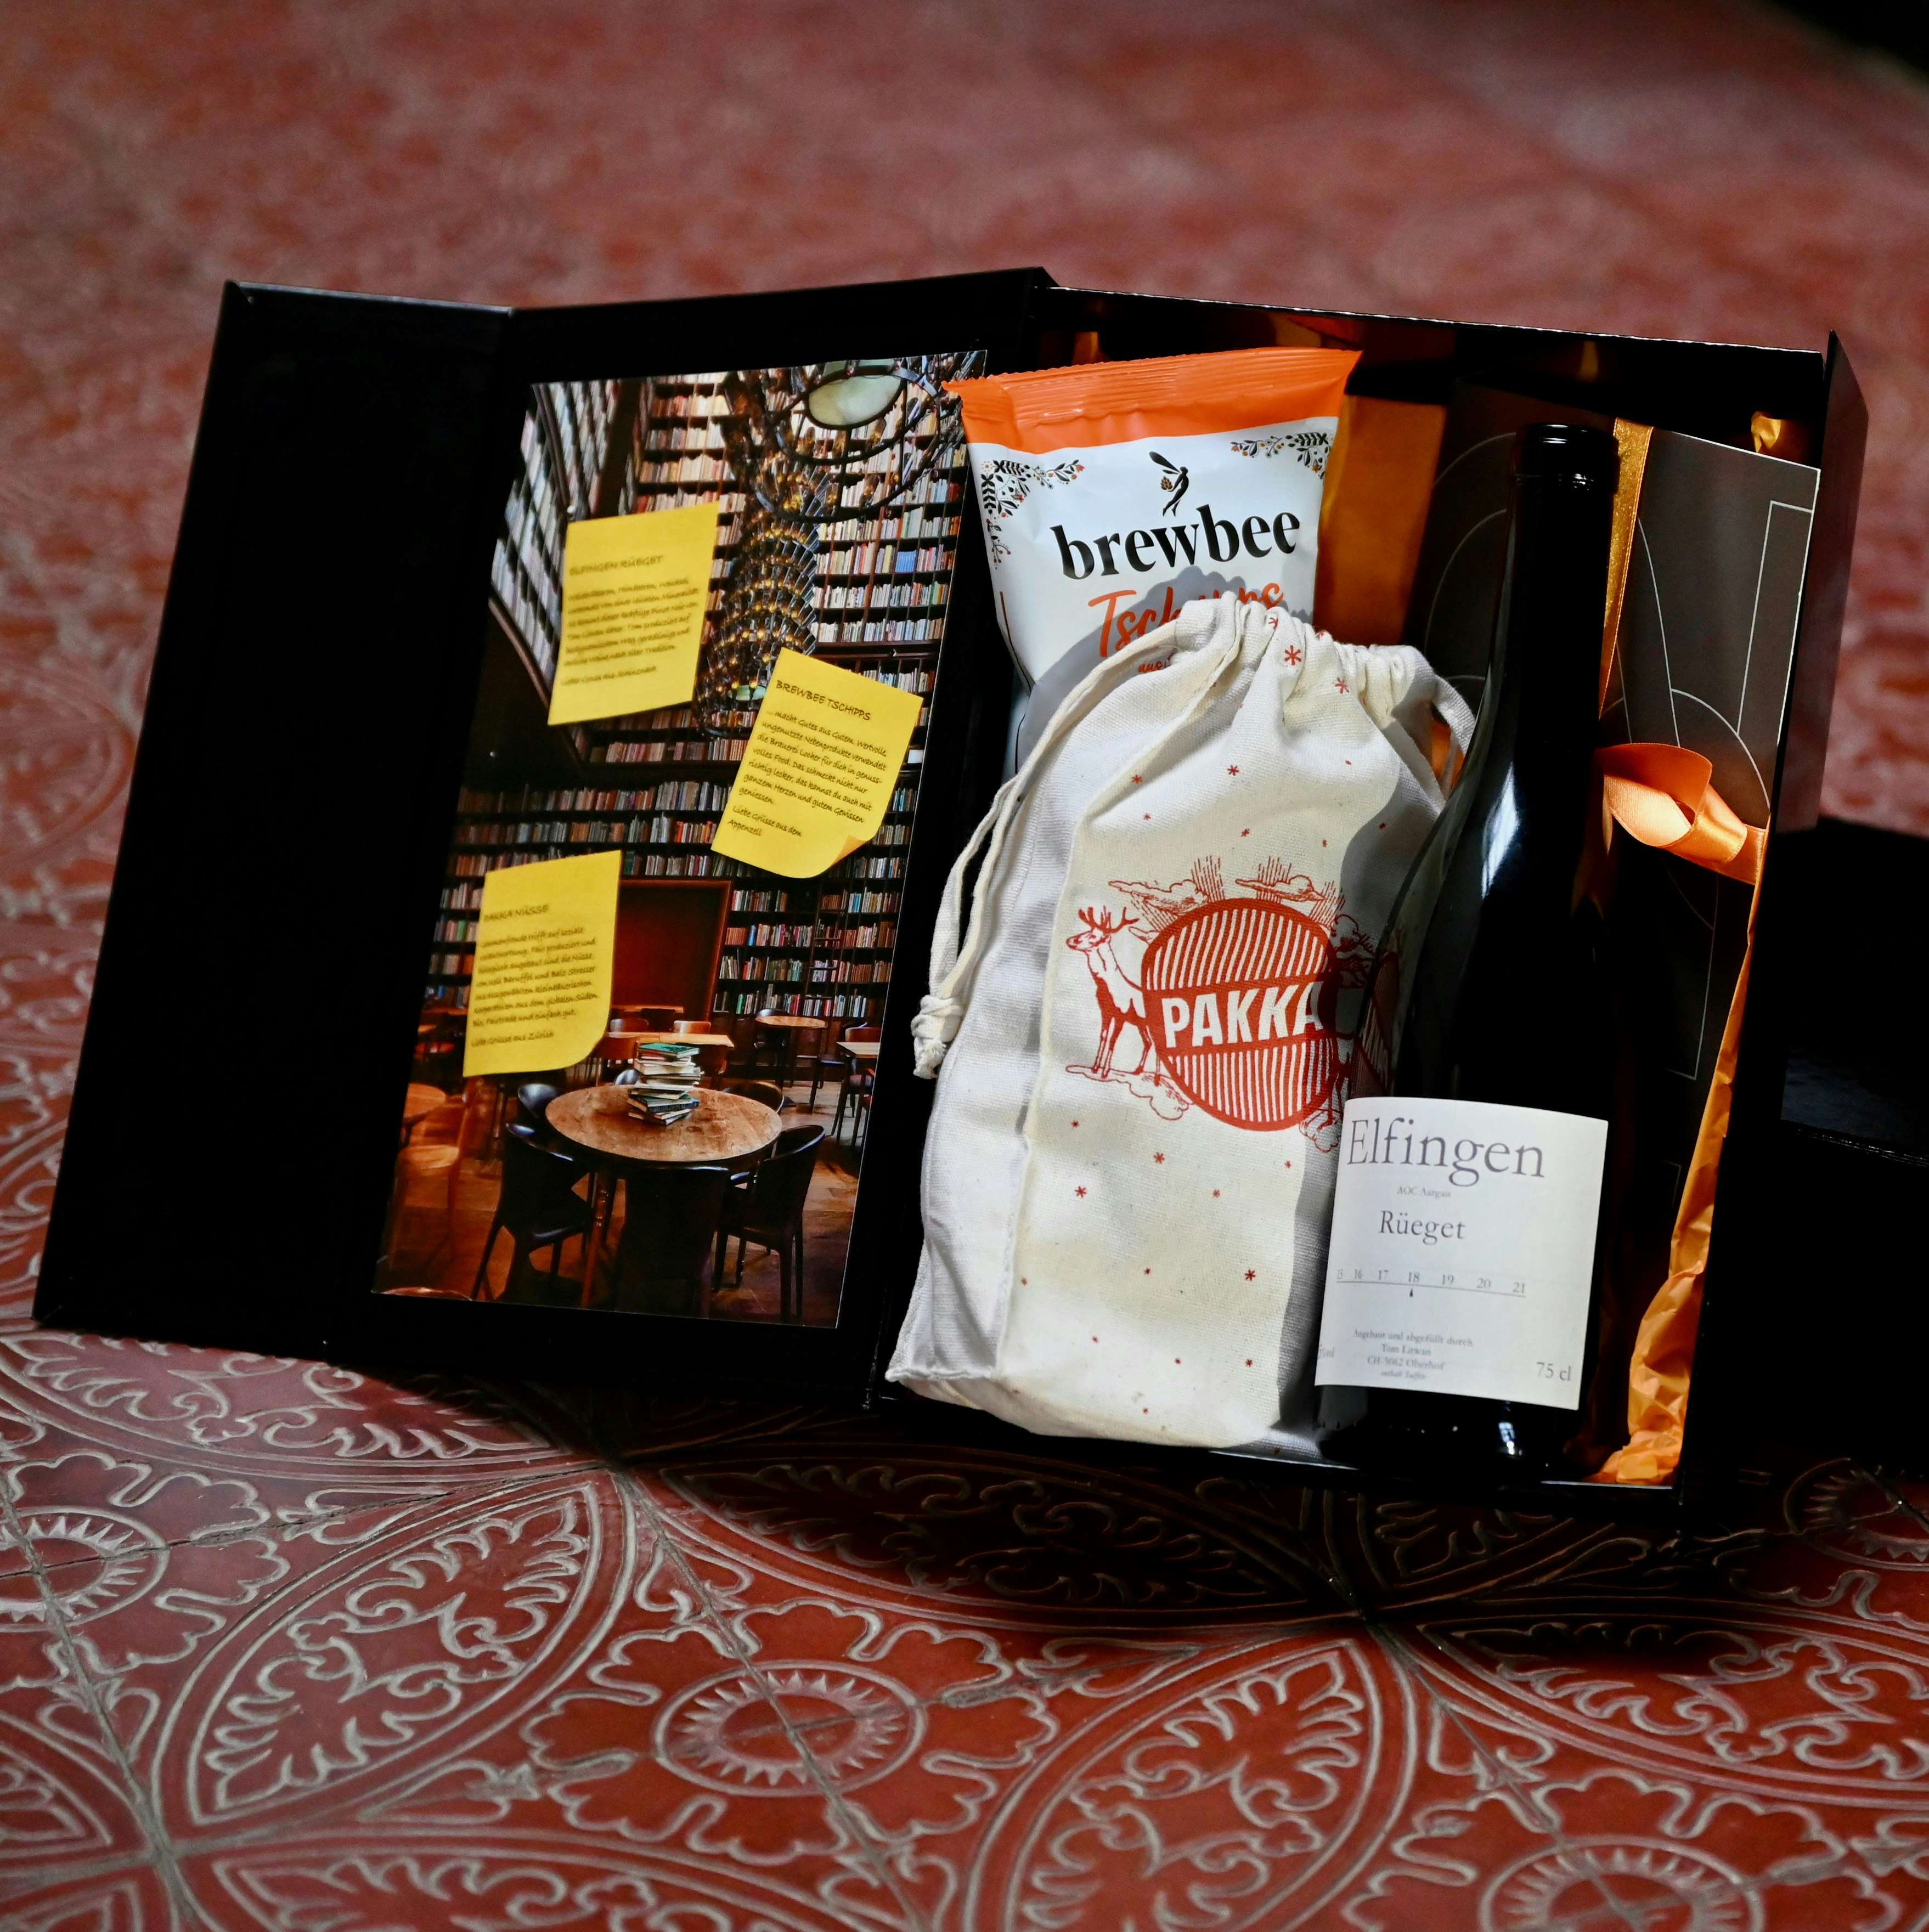 “Wine lover” gift box with voucher